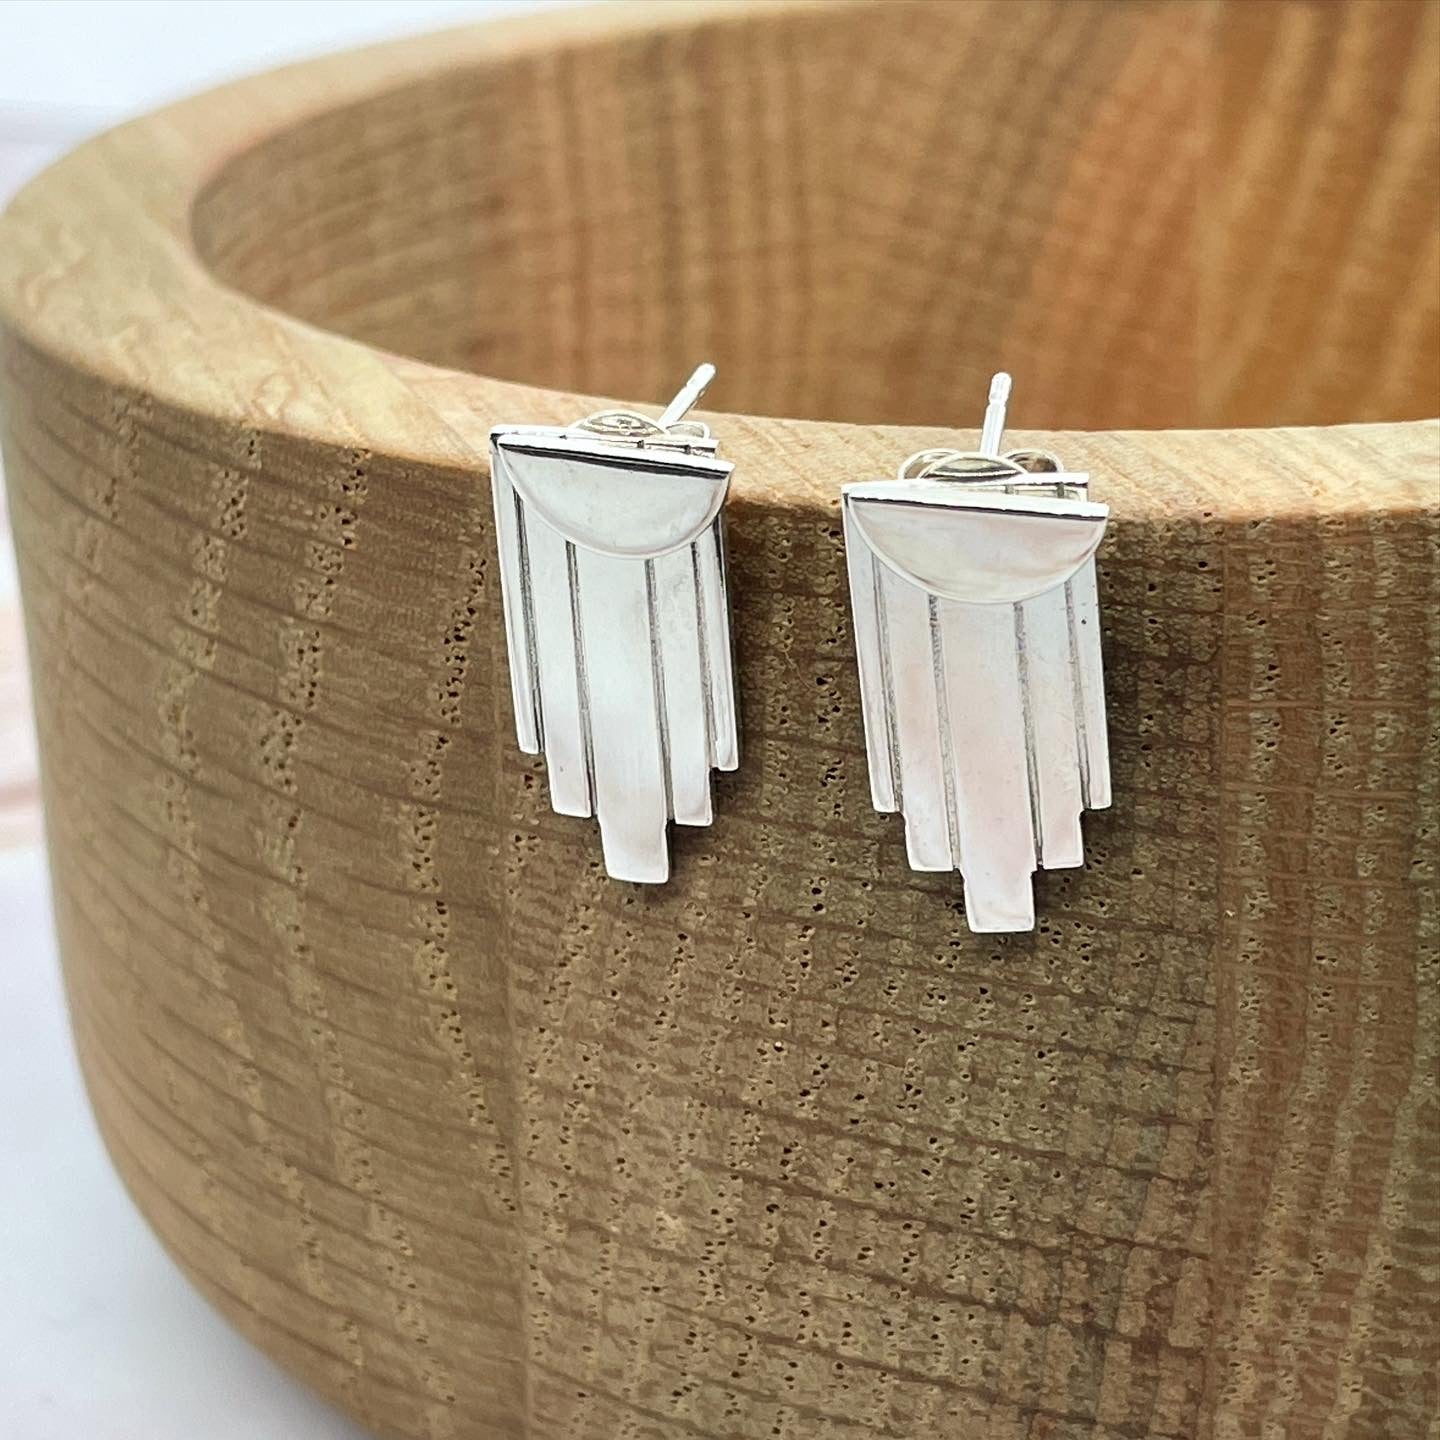 Silver earrings close up on wooden bowl